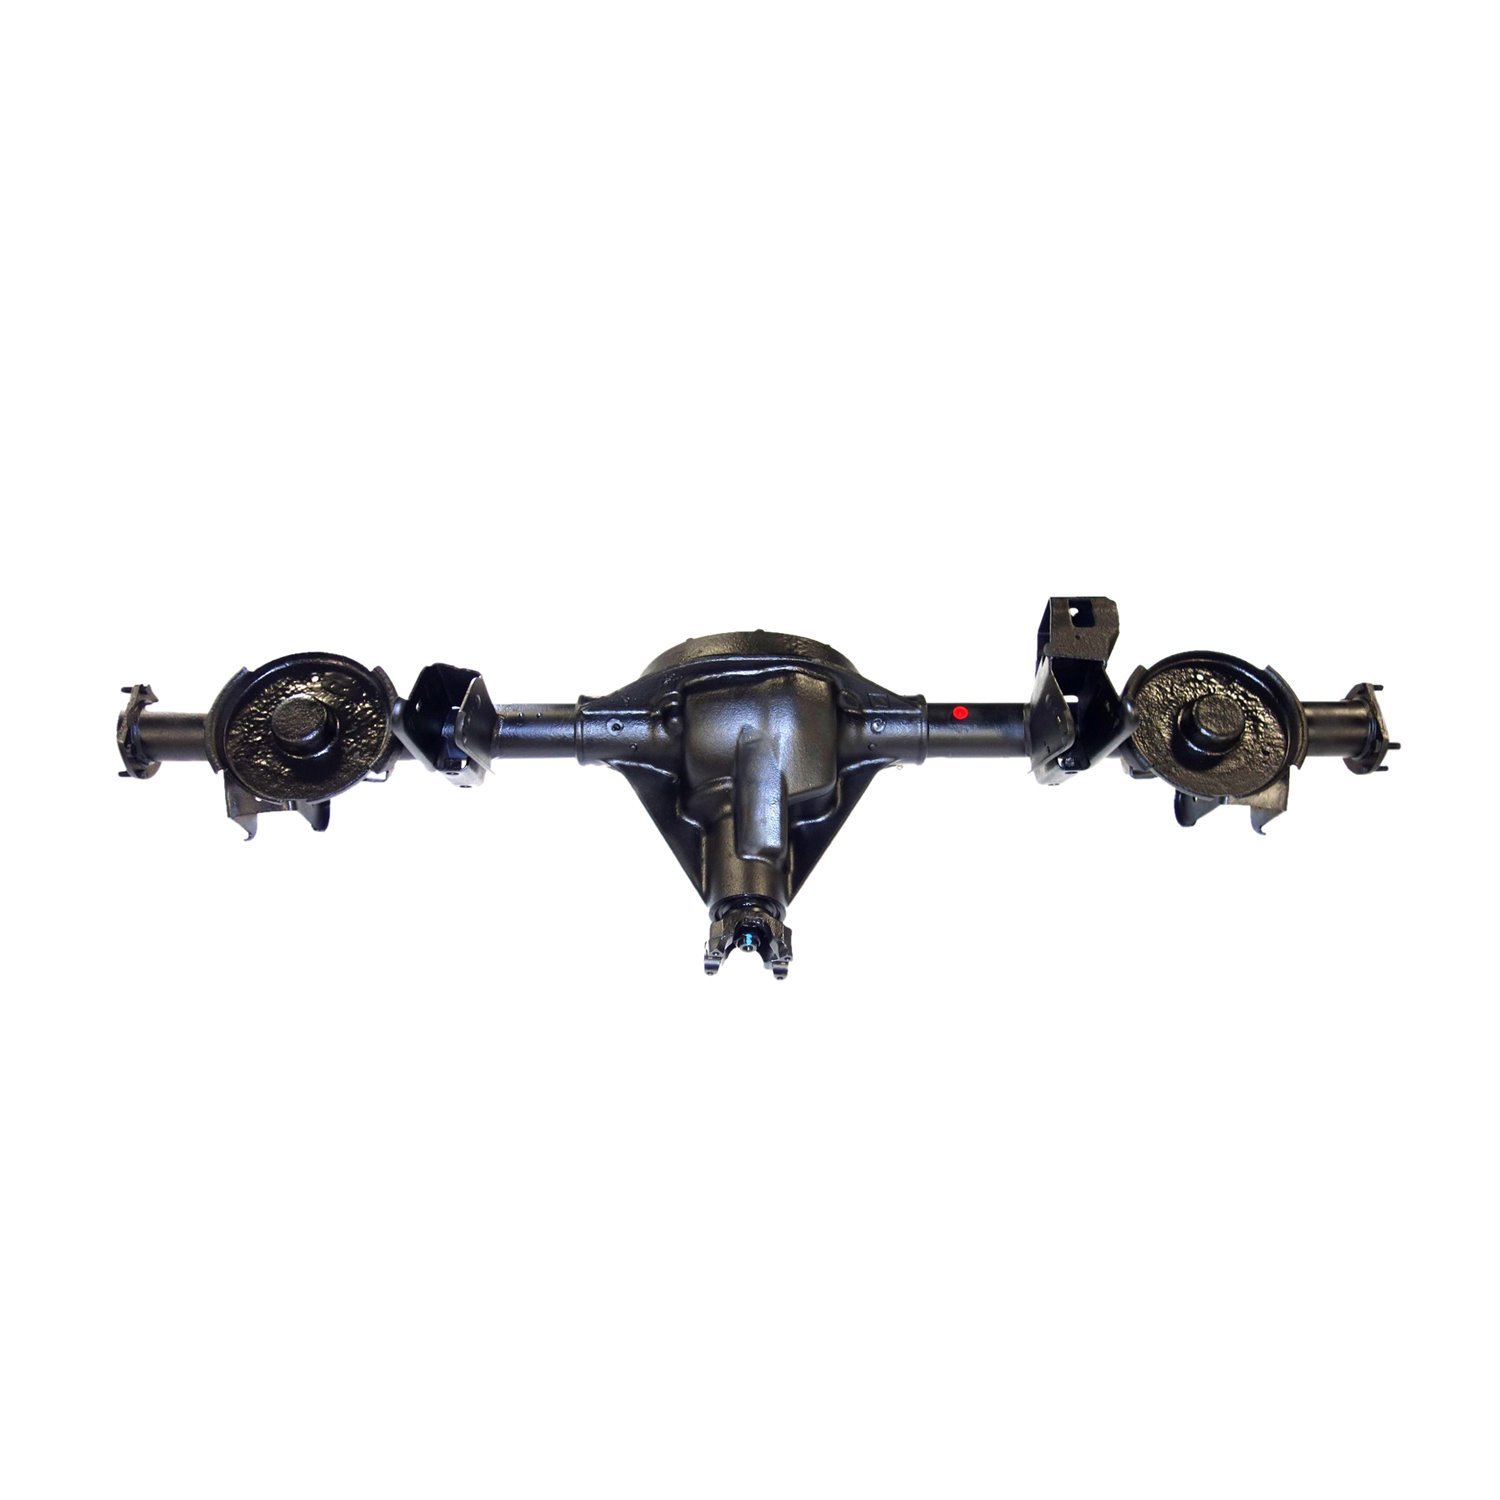 Remanufactured Complete Axle Assembly for Dana 35 97-02 Jeep Wrangler 3.55 Ratio, ABS